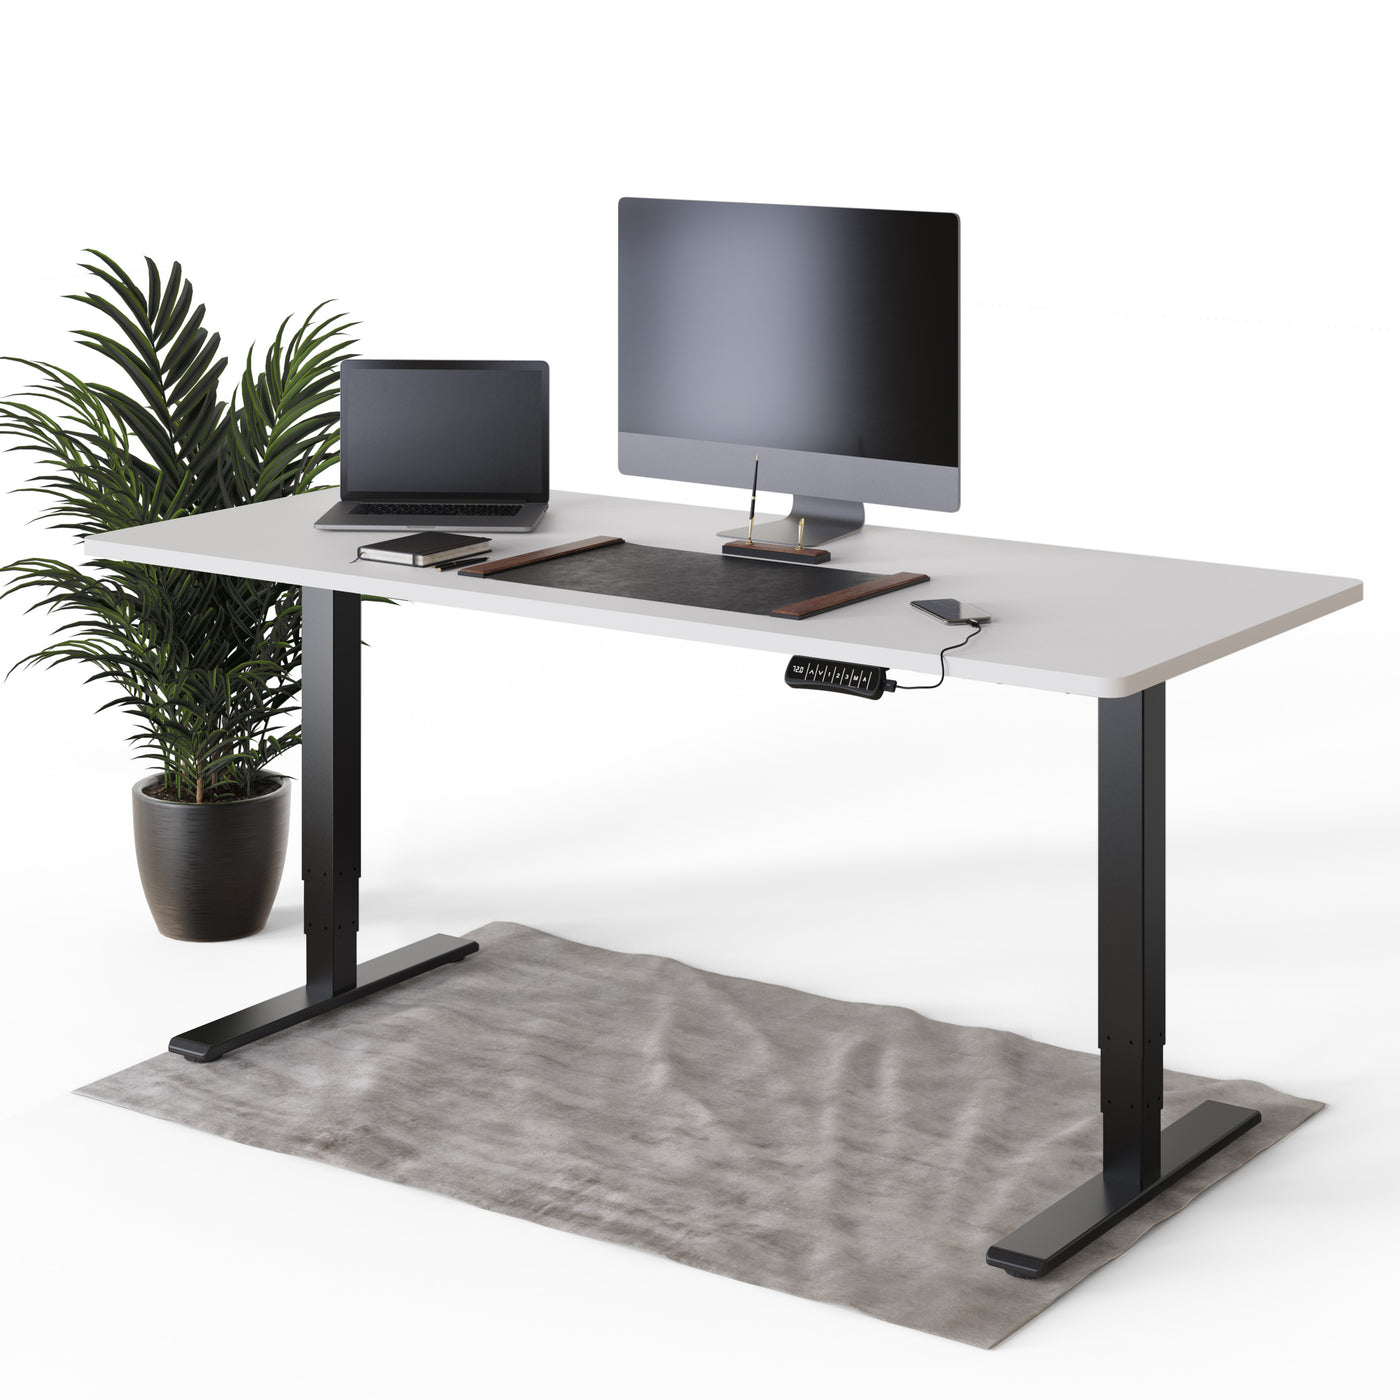 DESQUP PRO PLUS | Electrically height-adjustable desk 